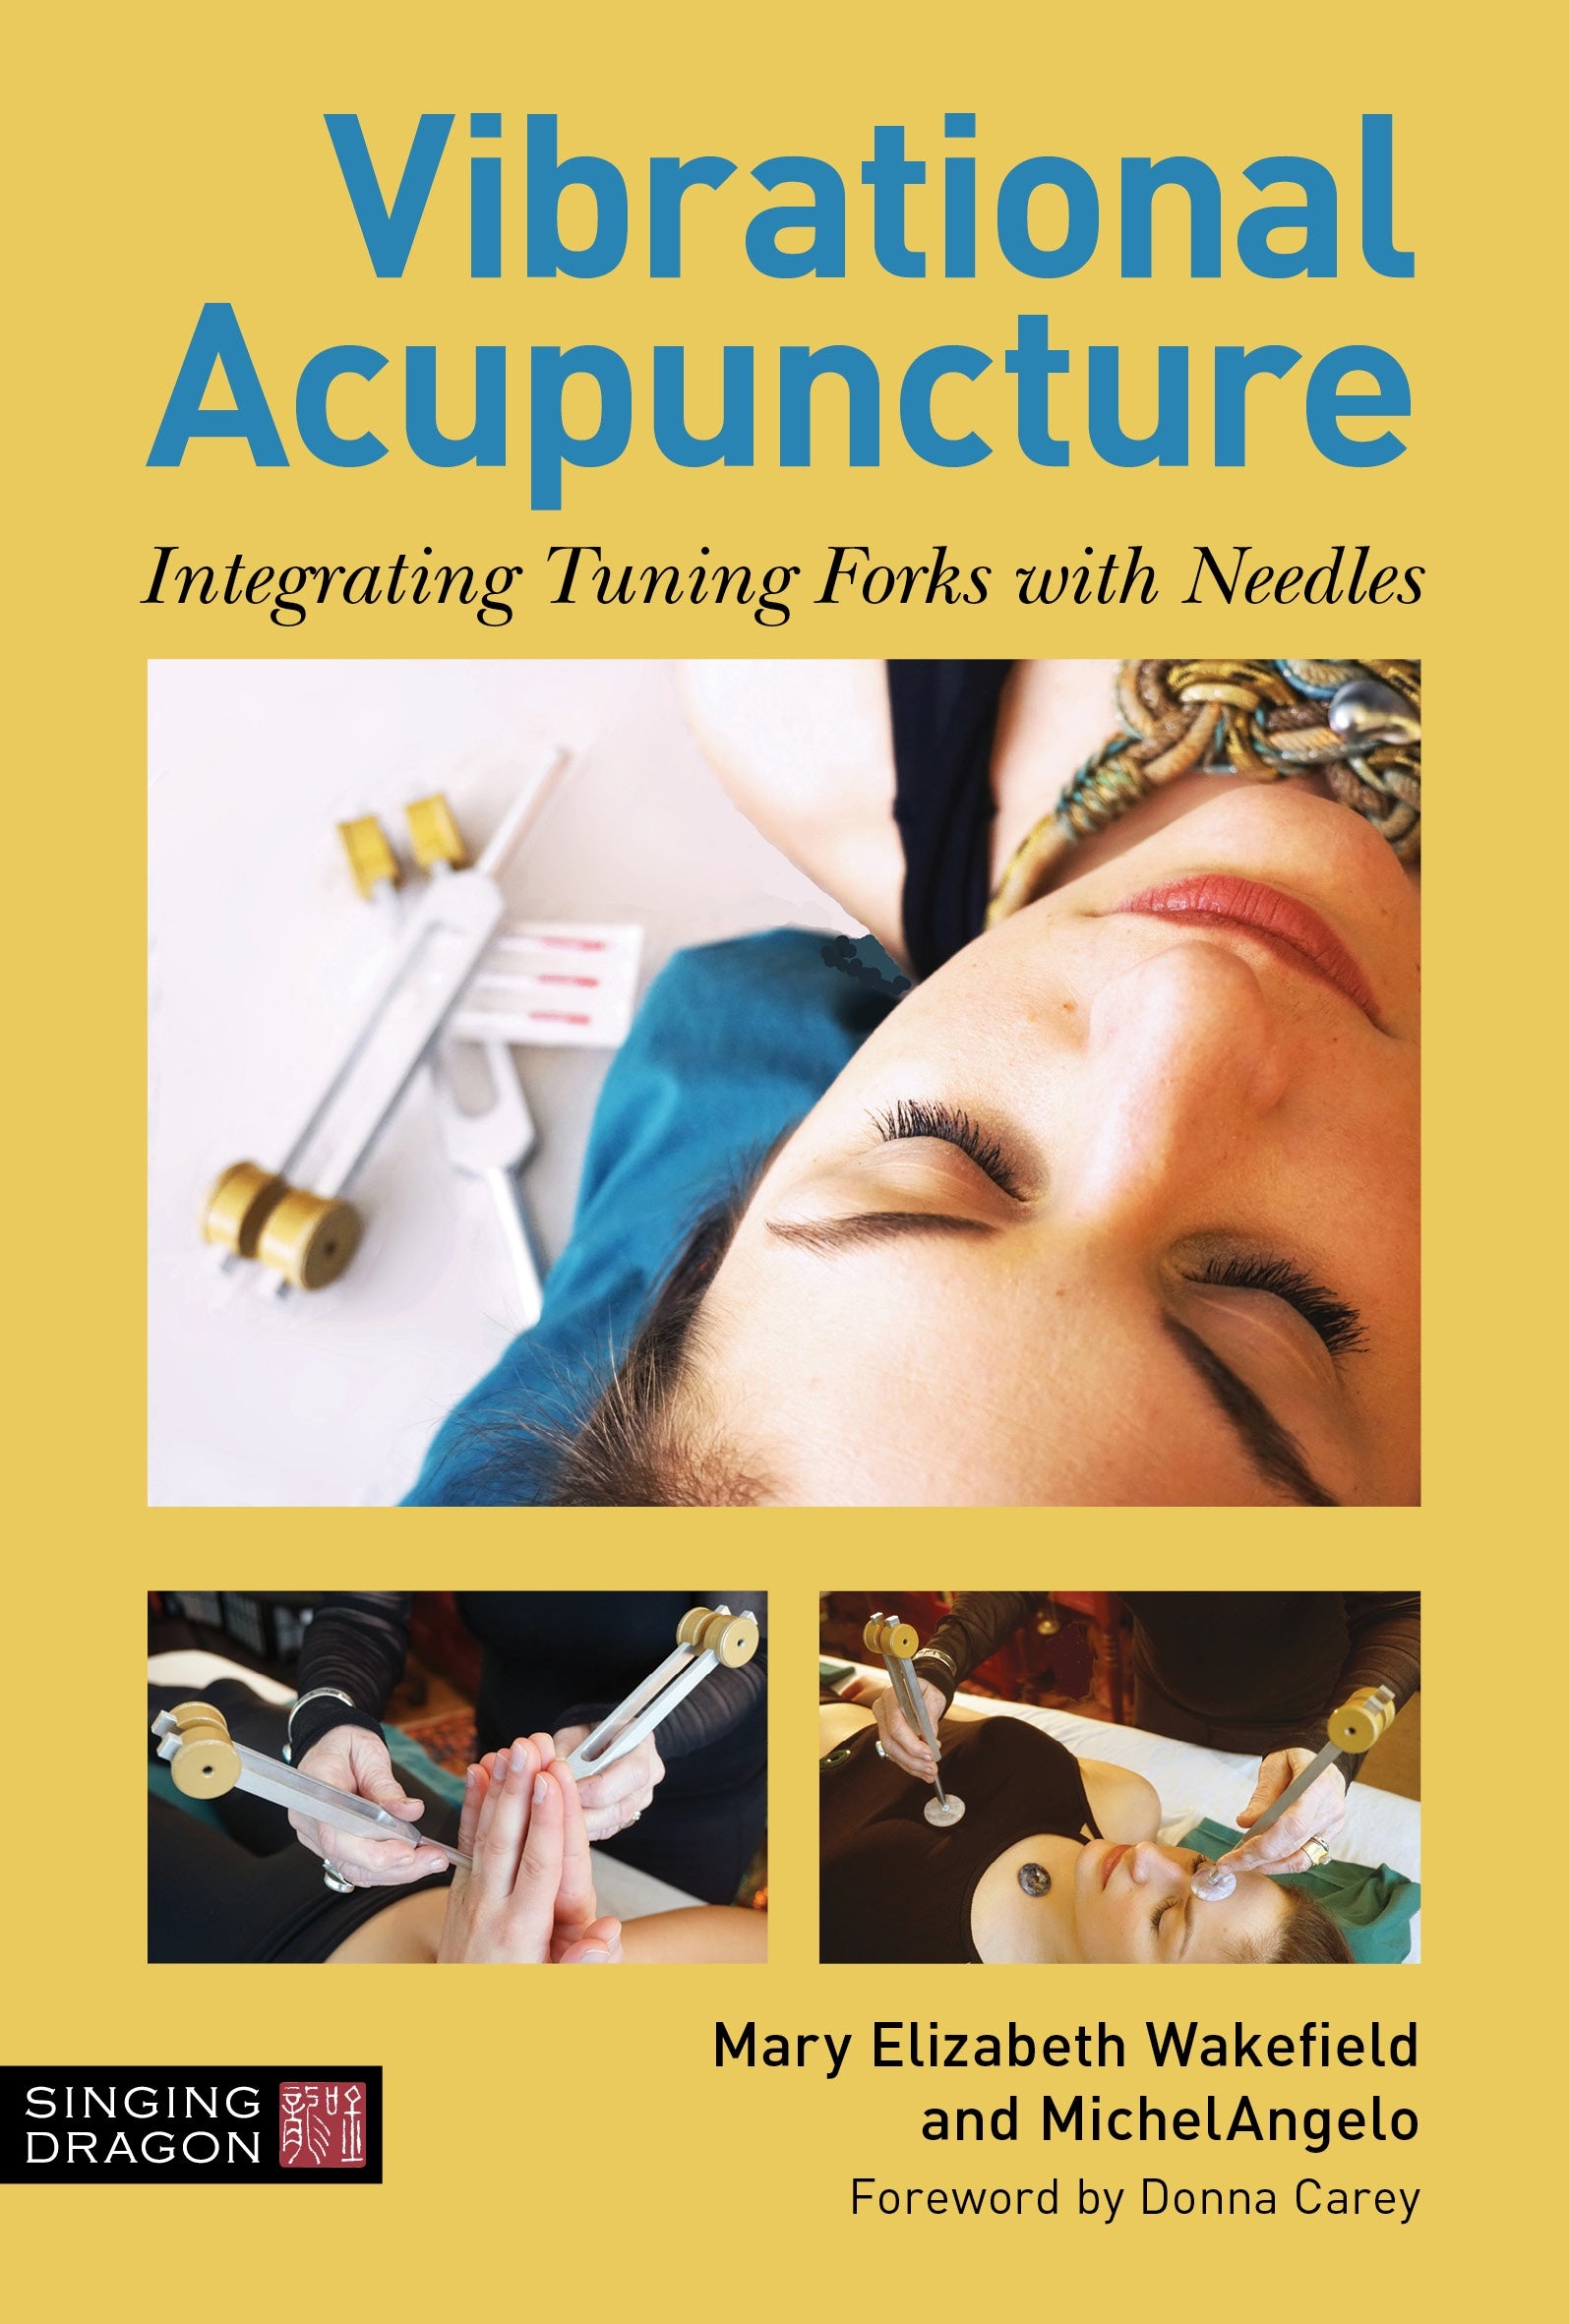 Vibrational Acupuncture by Donna Carey, Mary Elizabeth Wakefield,  MichelAngelo